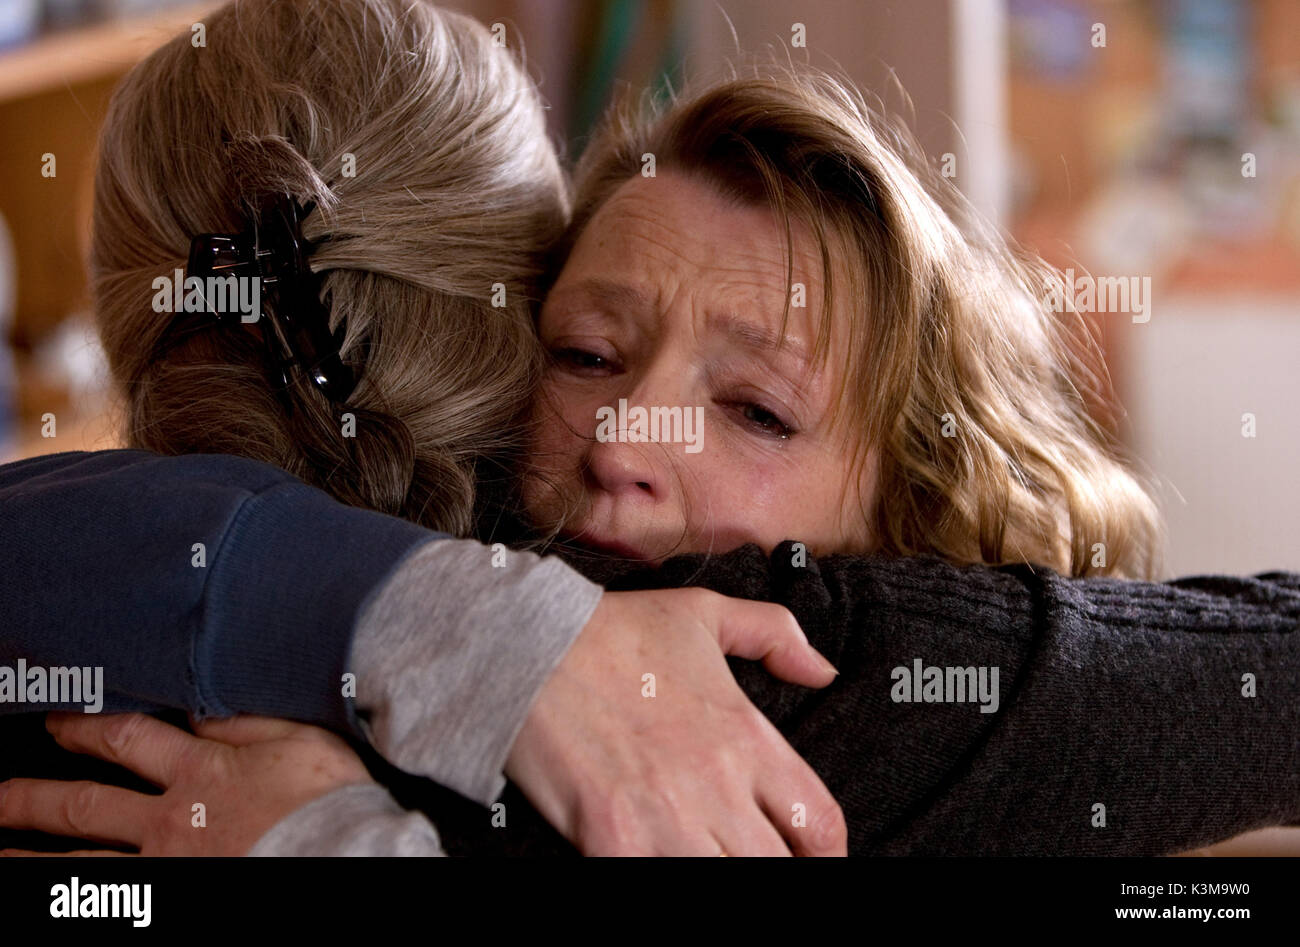 ANOTHER YEAR Lesley Manville  ANOTHER YEAR Lesley Manville        Date: 2010 Stock Photo